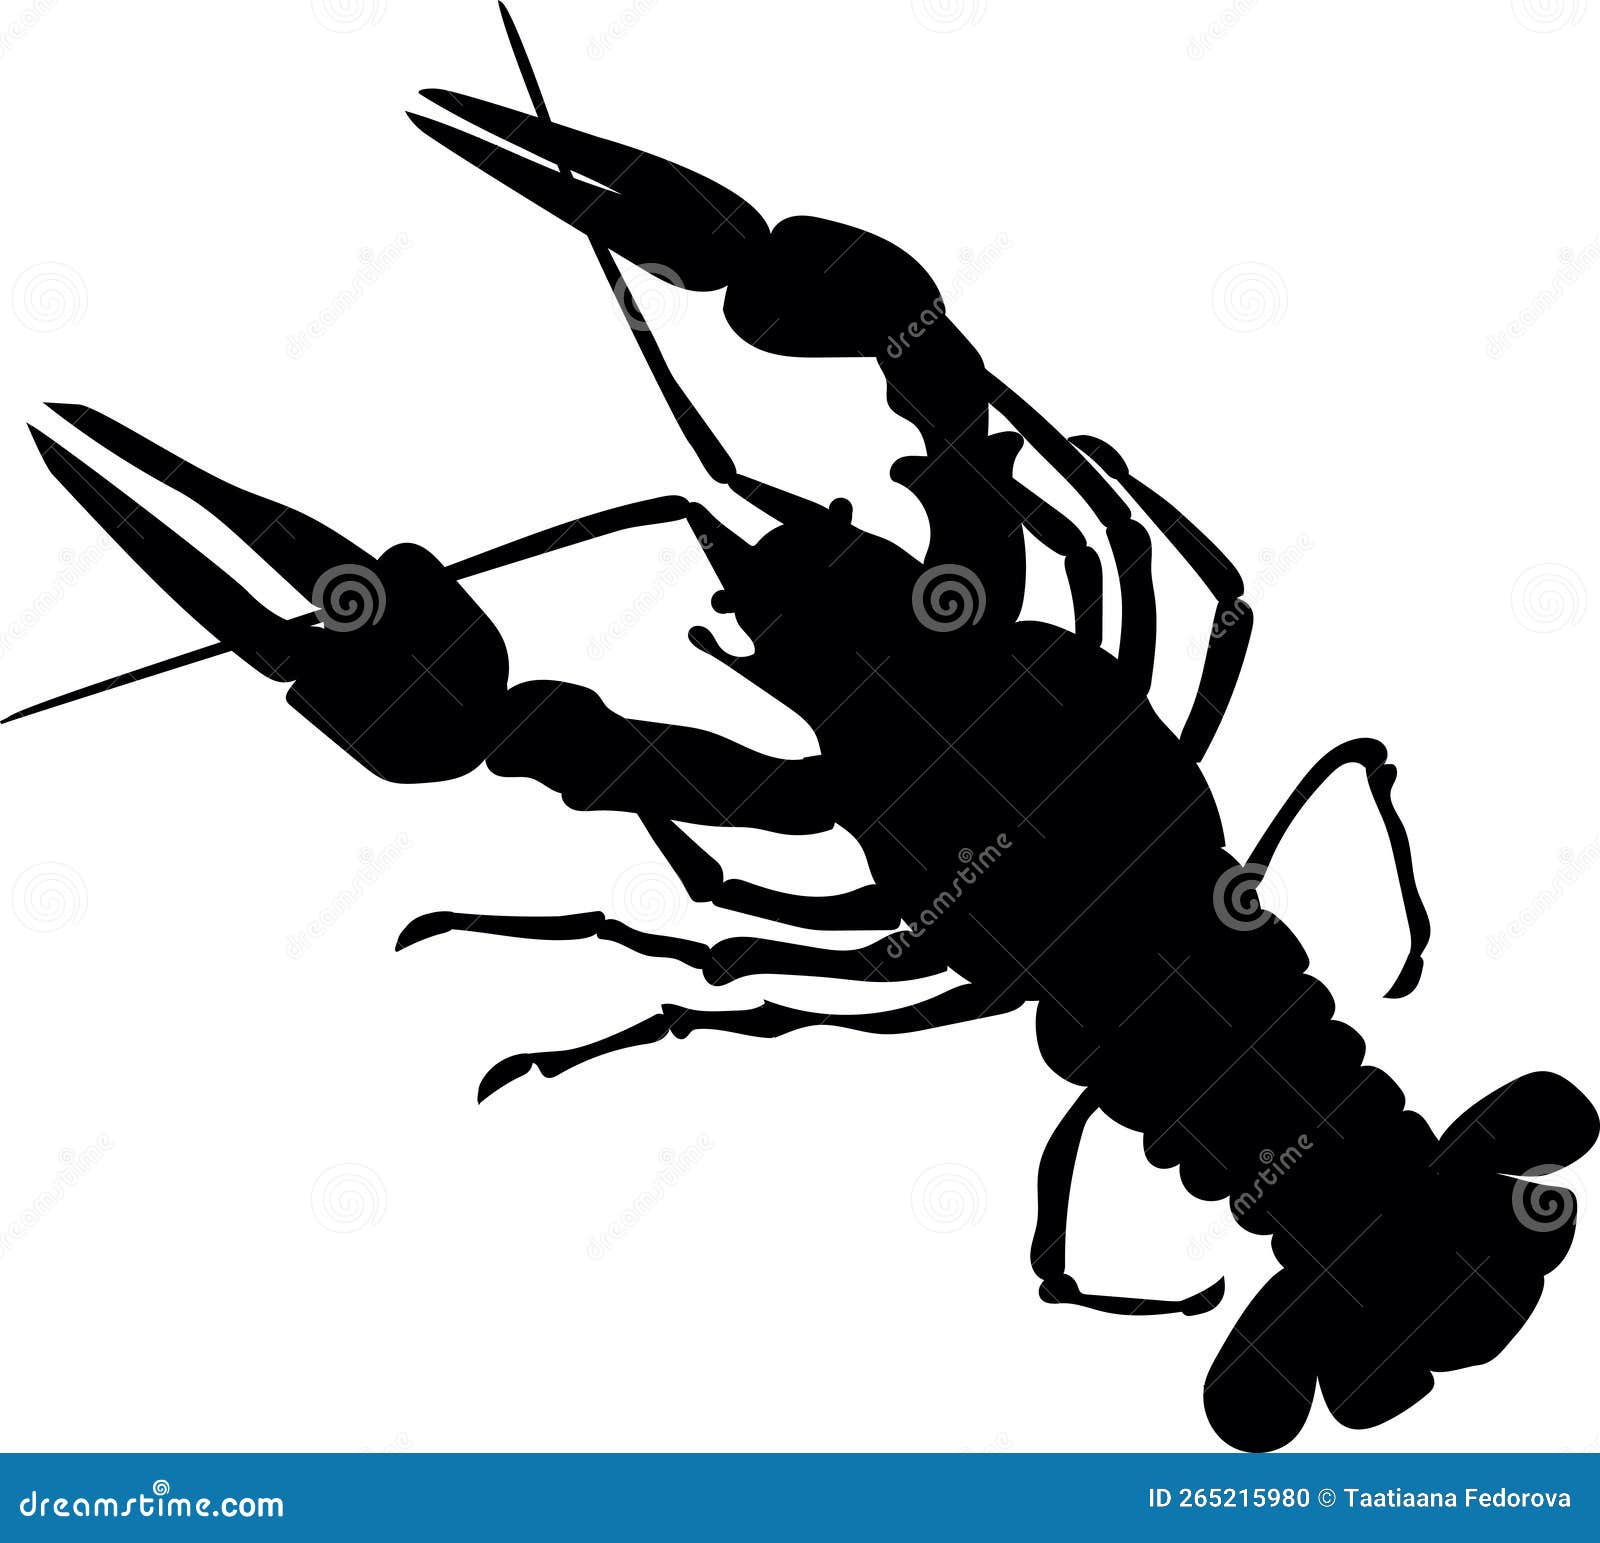 cancer is an armored animal with large claws near its head